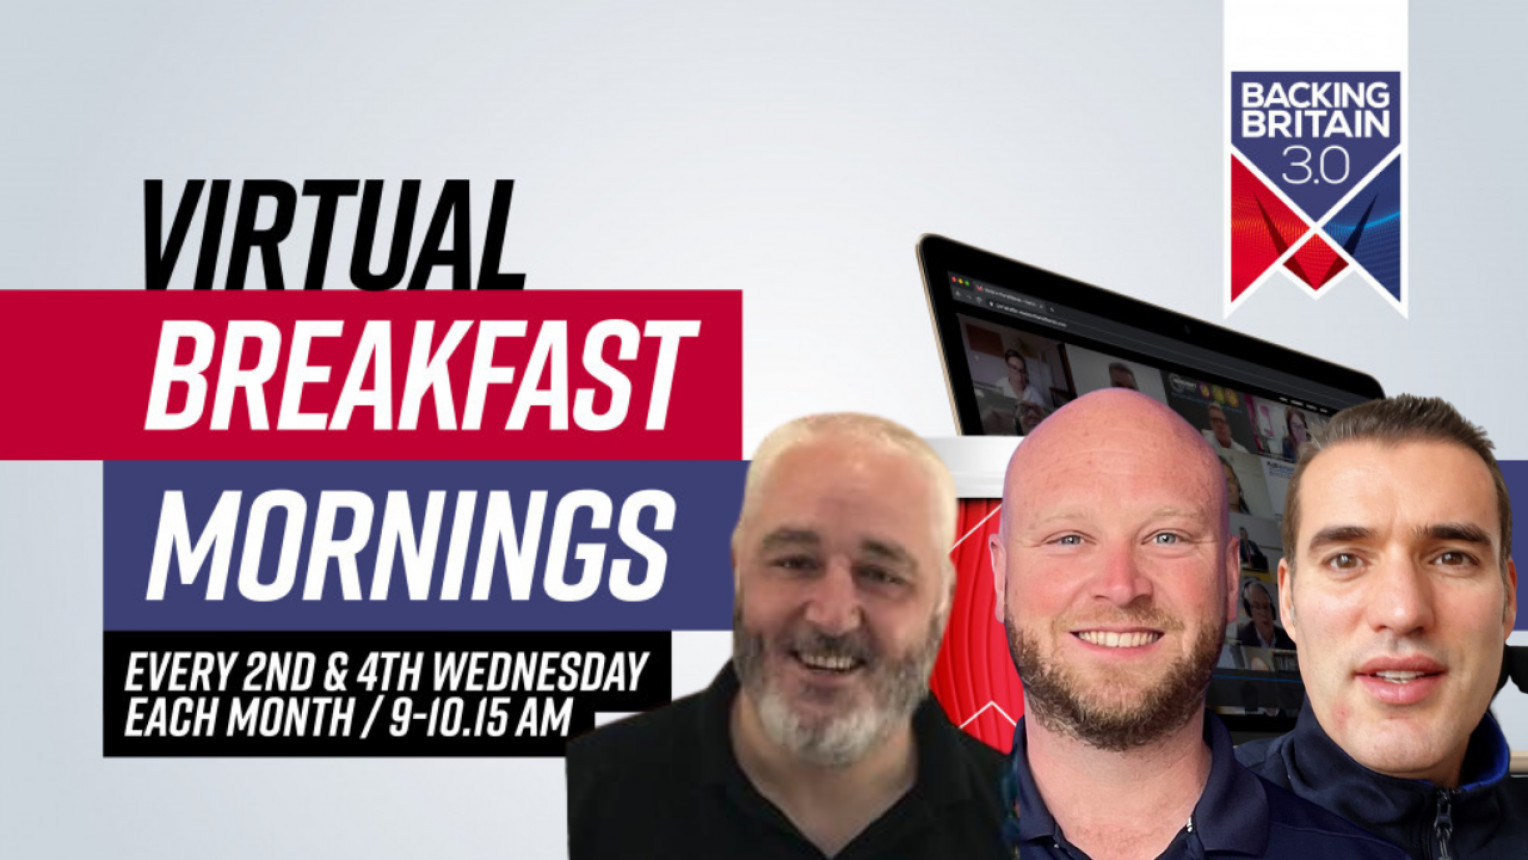 Backing Britain Virtual Breakfast Morning with Lander Automotive, Exactaform and Infinity Metals